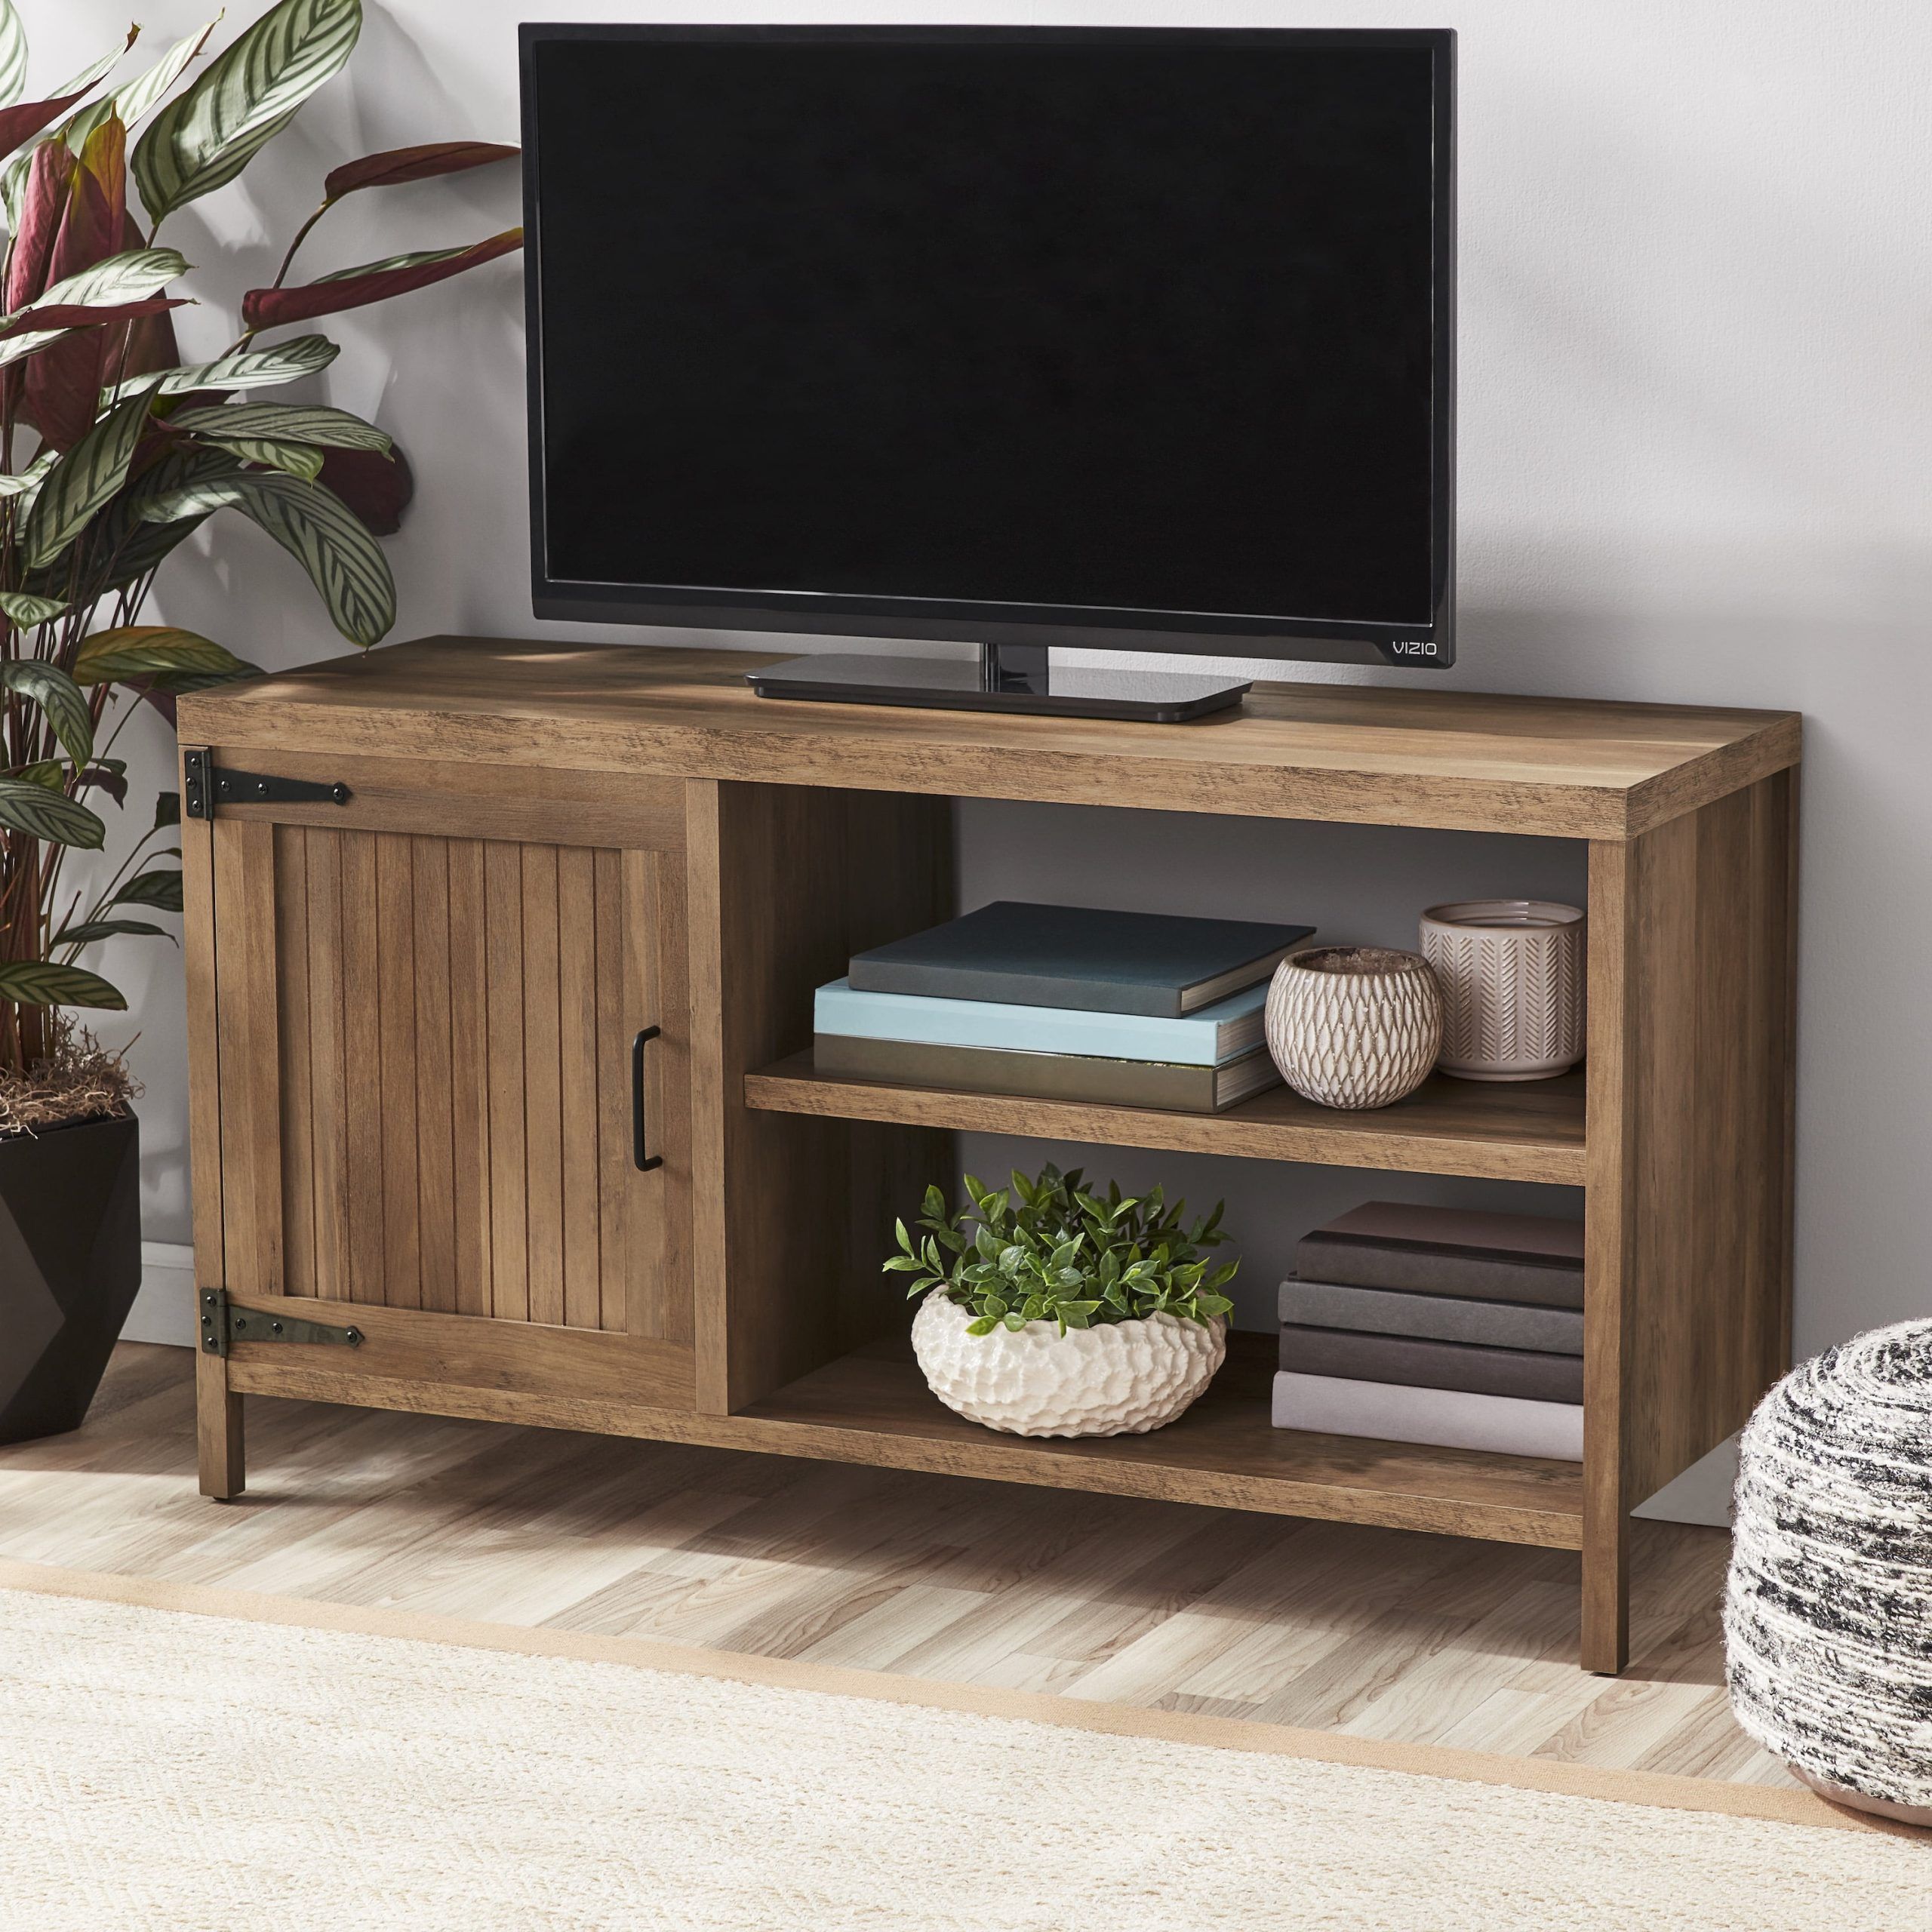 Mainstays Farmhouse Tv Stand For Tvs Up To 50", Rustic Weathered Oak –  Walmart Throughout Farmhouse Stands For Tvs (Photo 11 of 15)